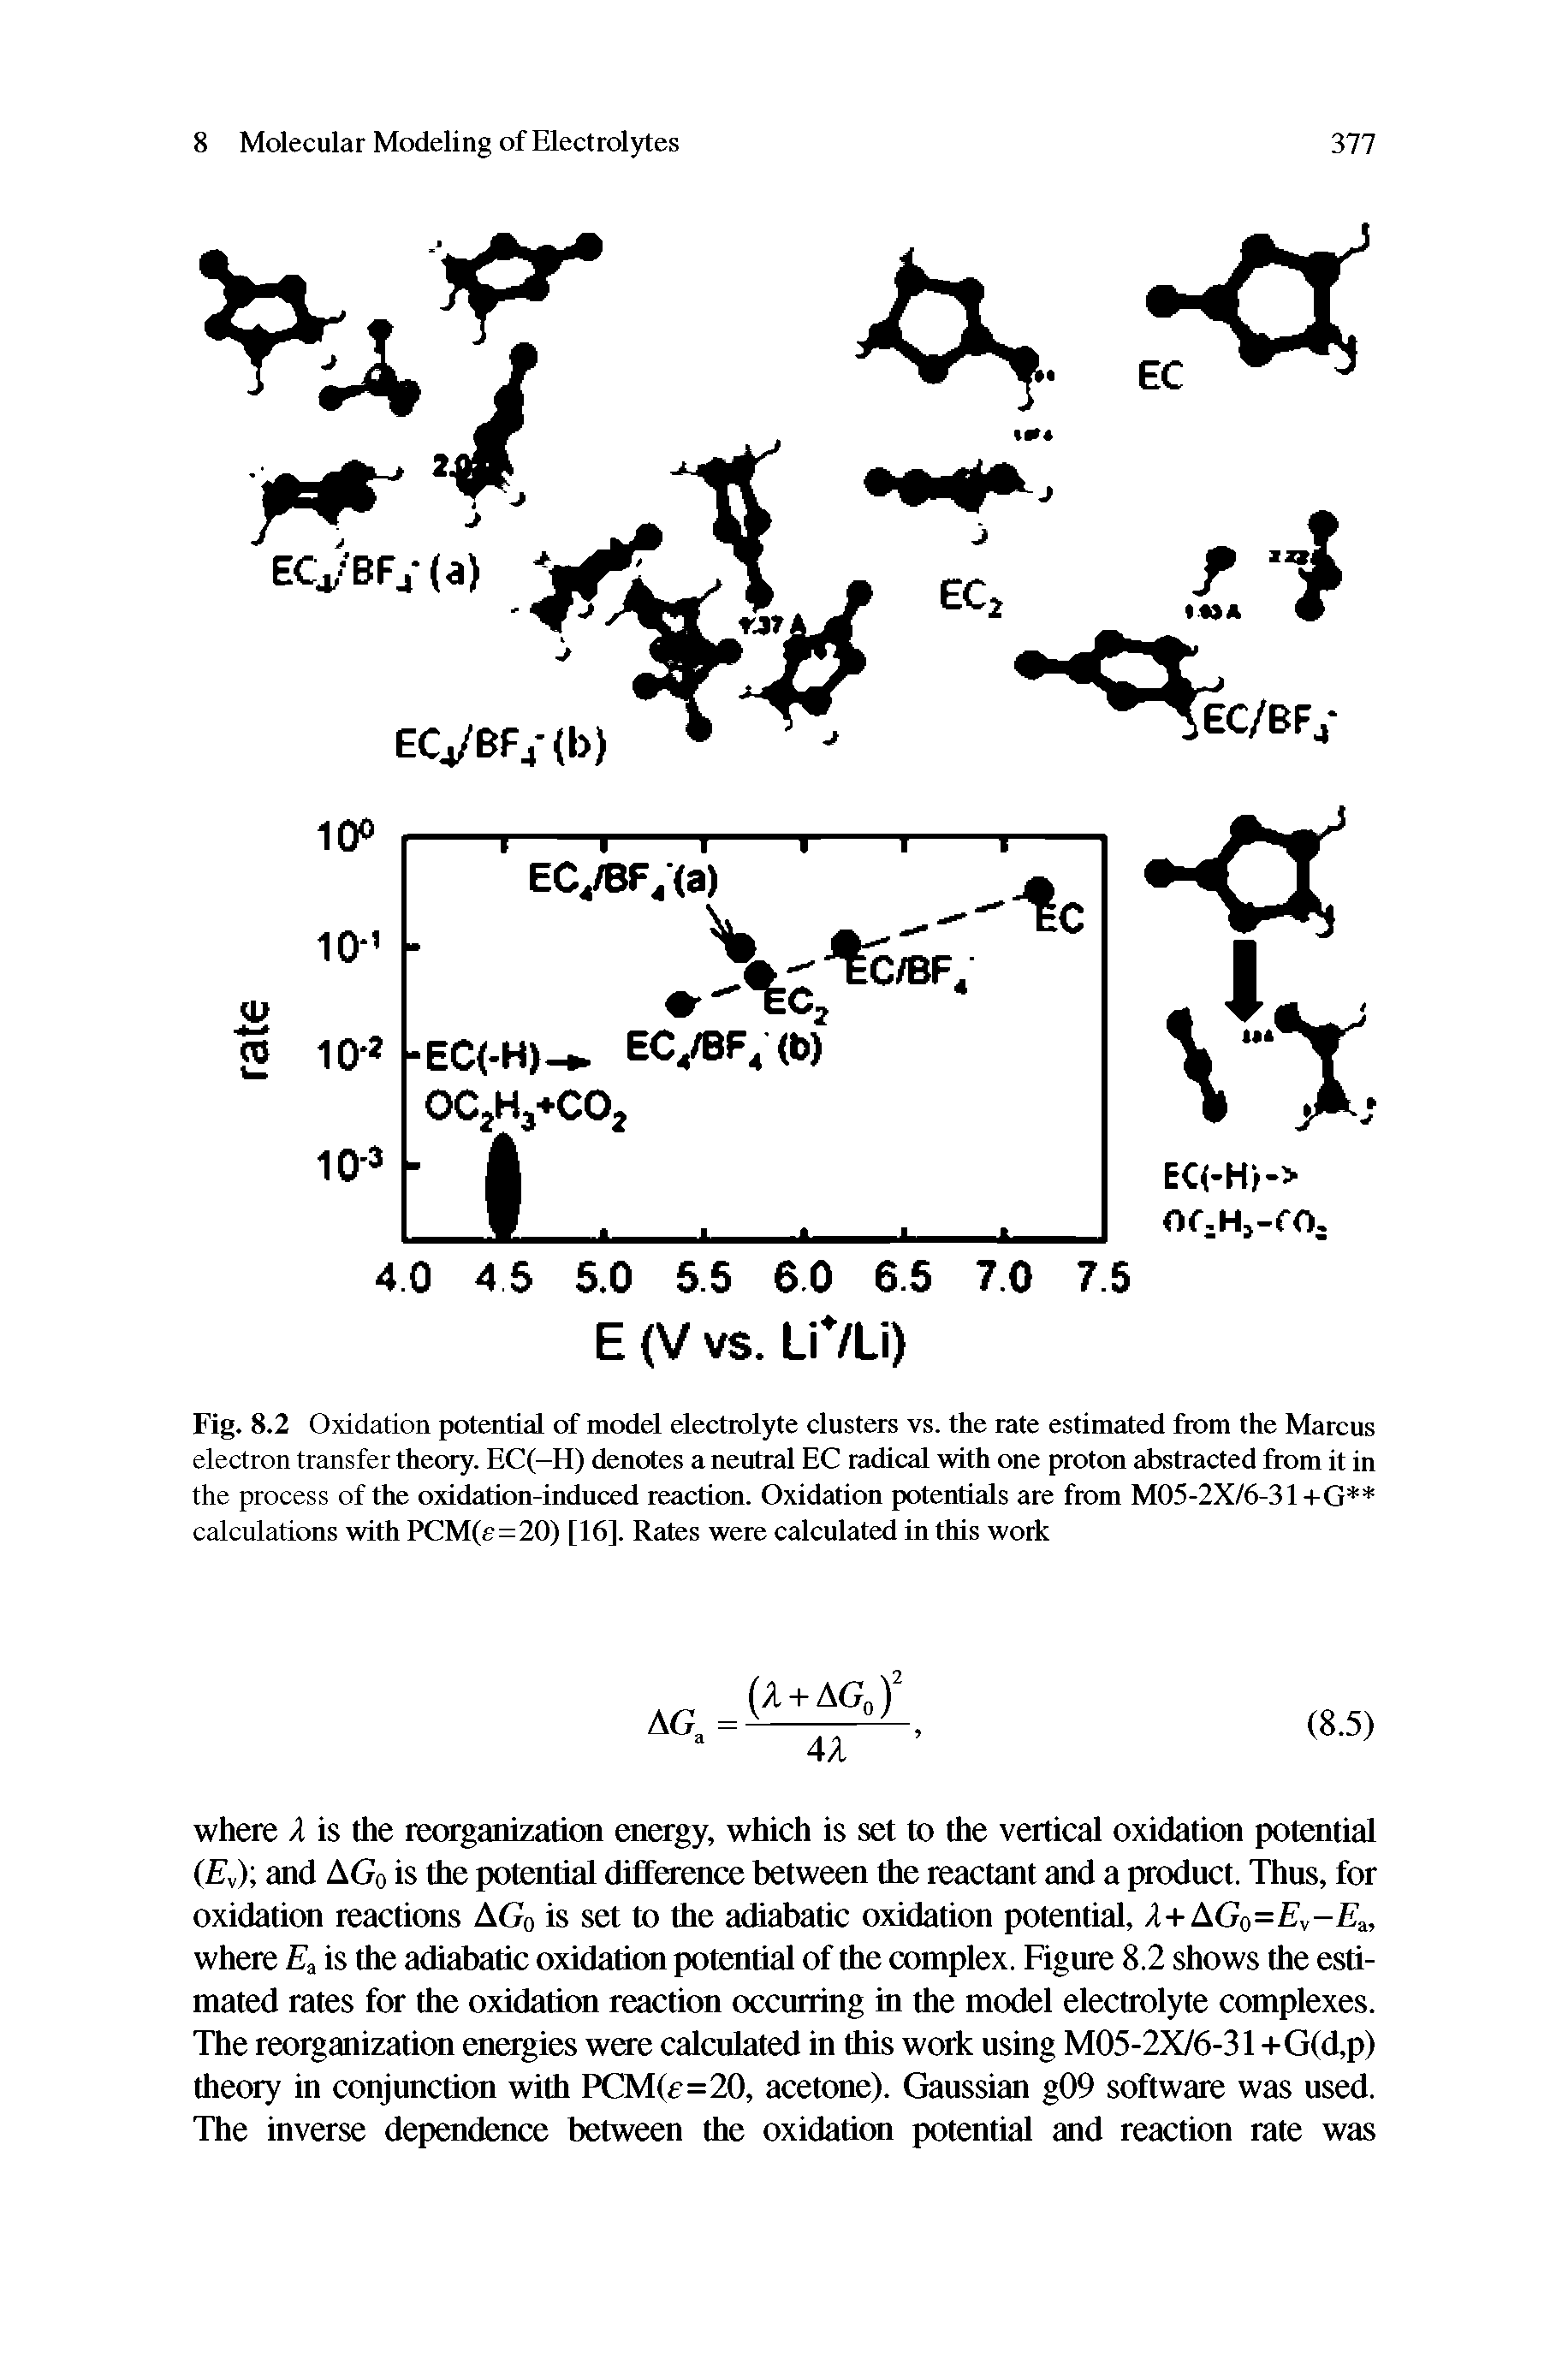 Fig. 8.2 Oxidation potential of model electrolyte clusters vs. the rate estimated from the Marcus electron transfer theory. EC(—H) denotes a neutnil EC radical with one proton abstracted from it in the process of the oxidation-induced reaction. Oxidation potentials are from M05-2X/6-31+G calculations with PCM(e=20) [16]. Rates were ceilculated in this work...